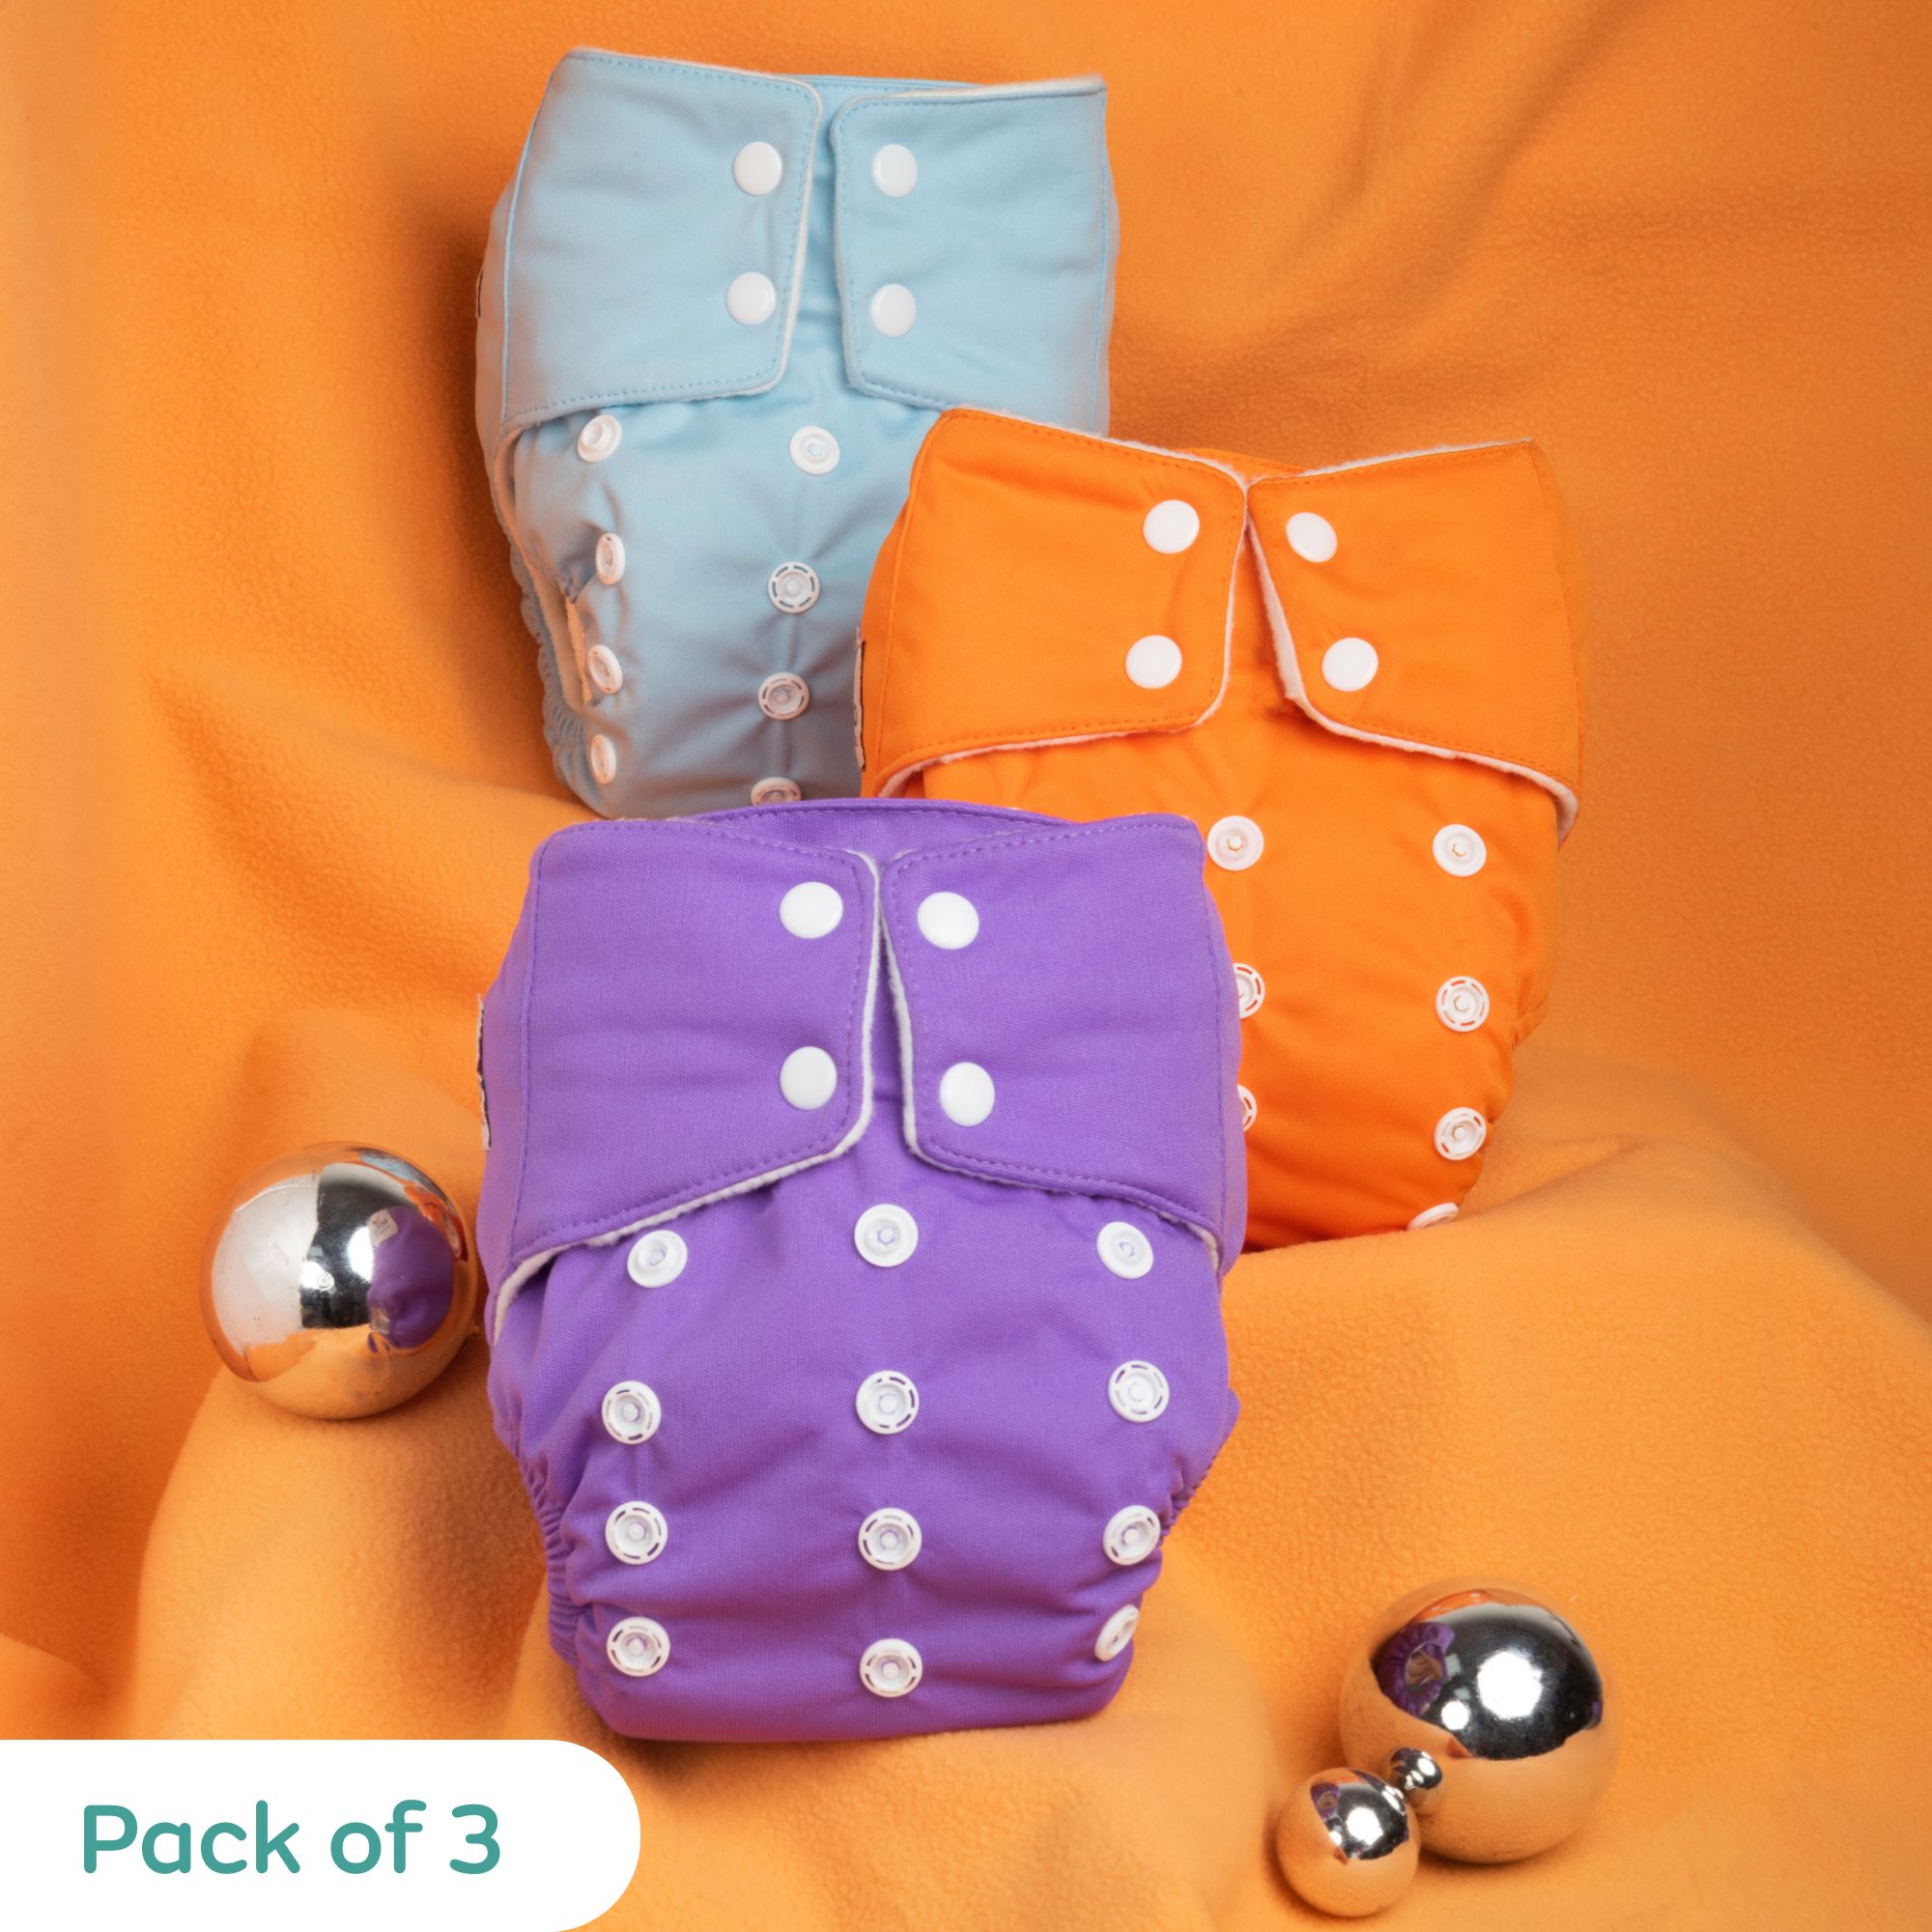 Adjustable Washable & Reusable Cloth Diaper With Dry Feel, Absorbent Insert Pad- Blue, Orange & Purple - Pack of 3